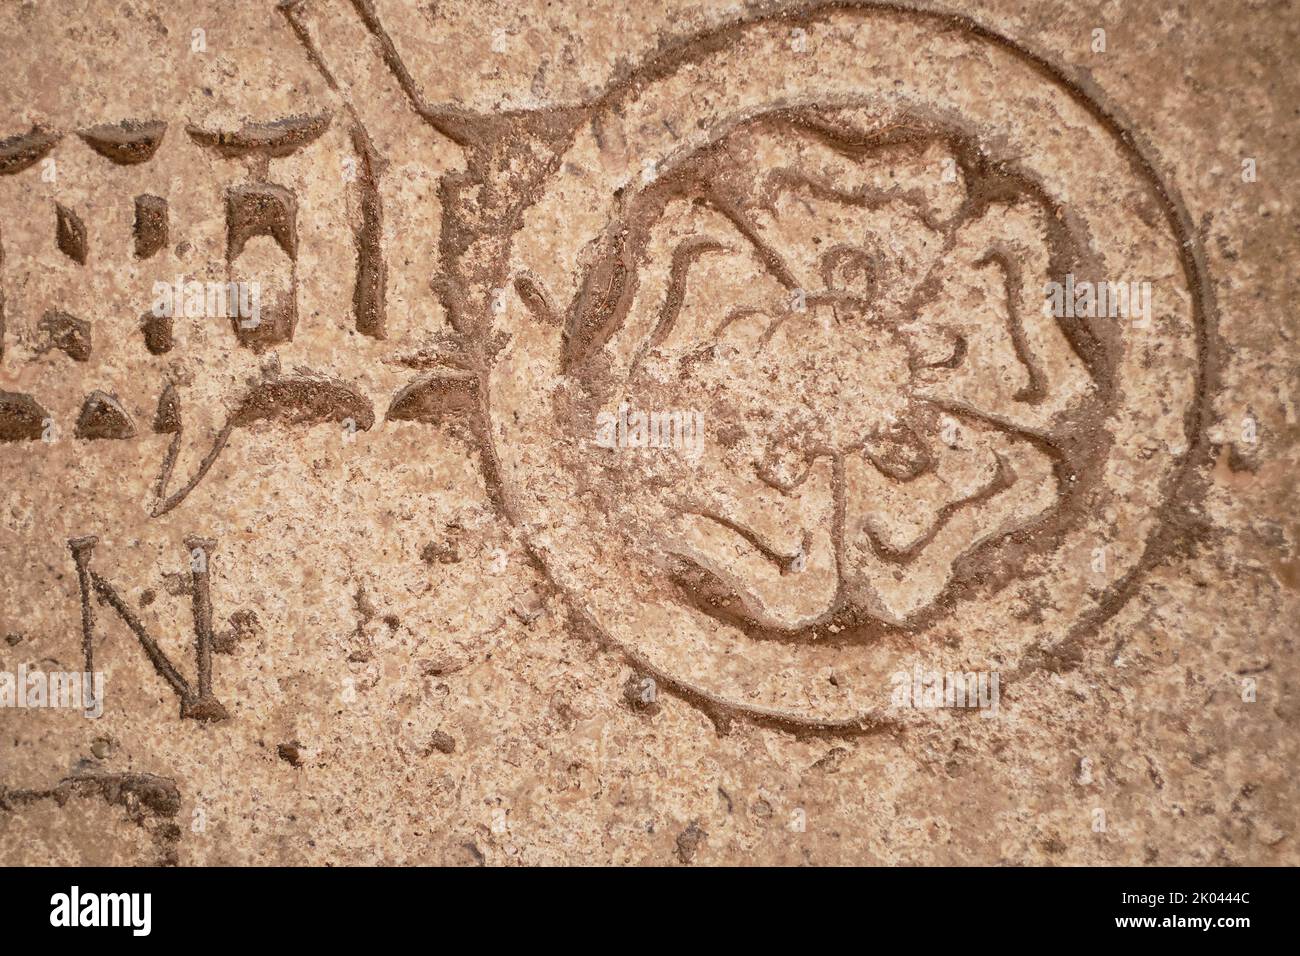 Carved symbol of a five-petaled rose with a globe on a stone tomb slab or epitaph. Stock Photo